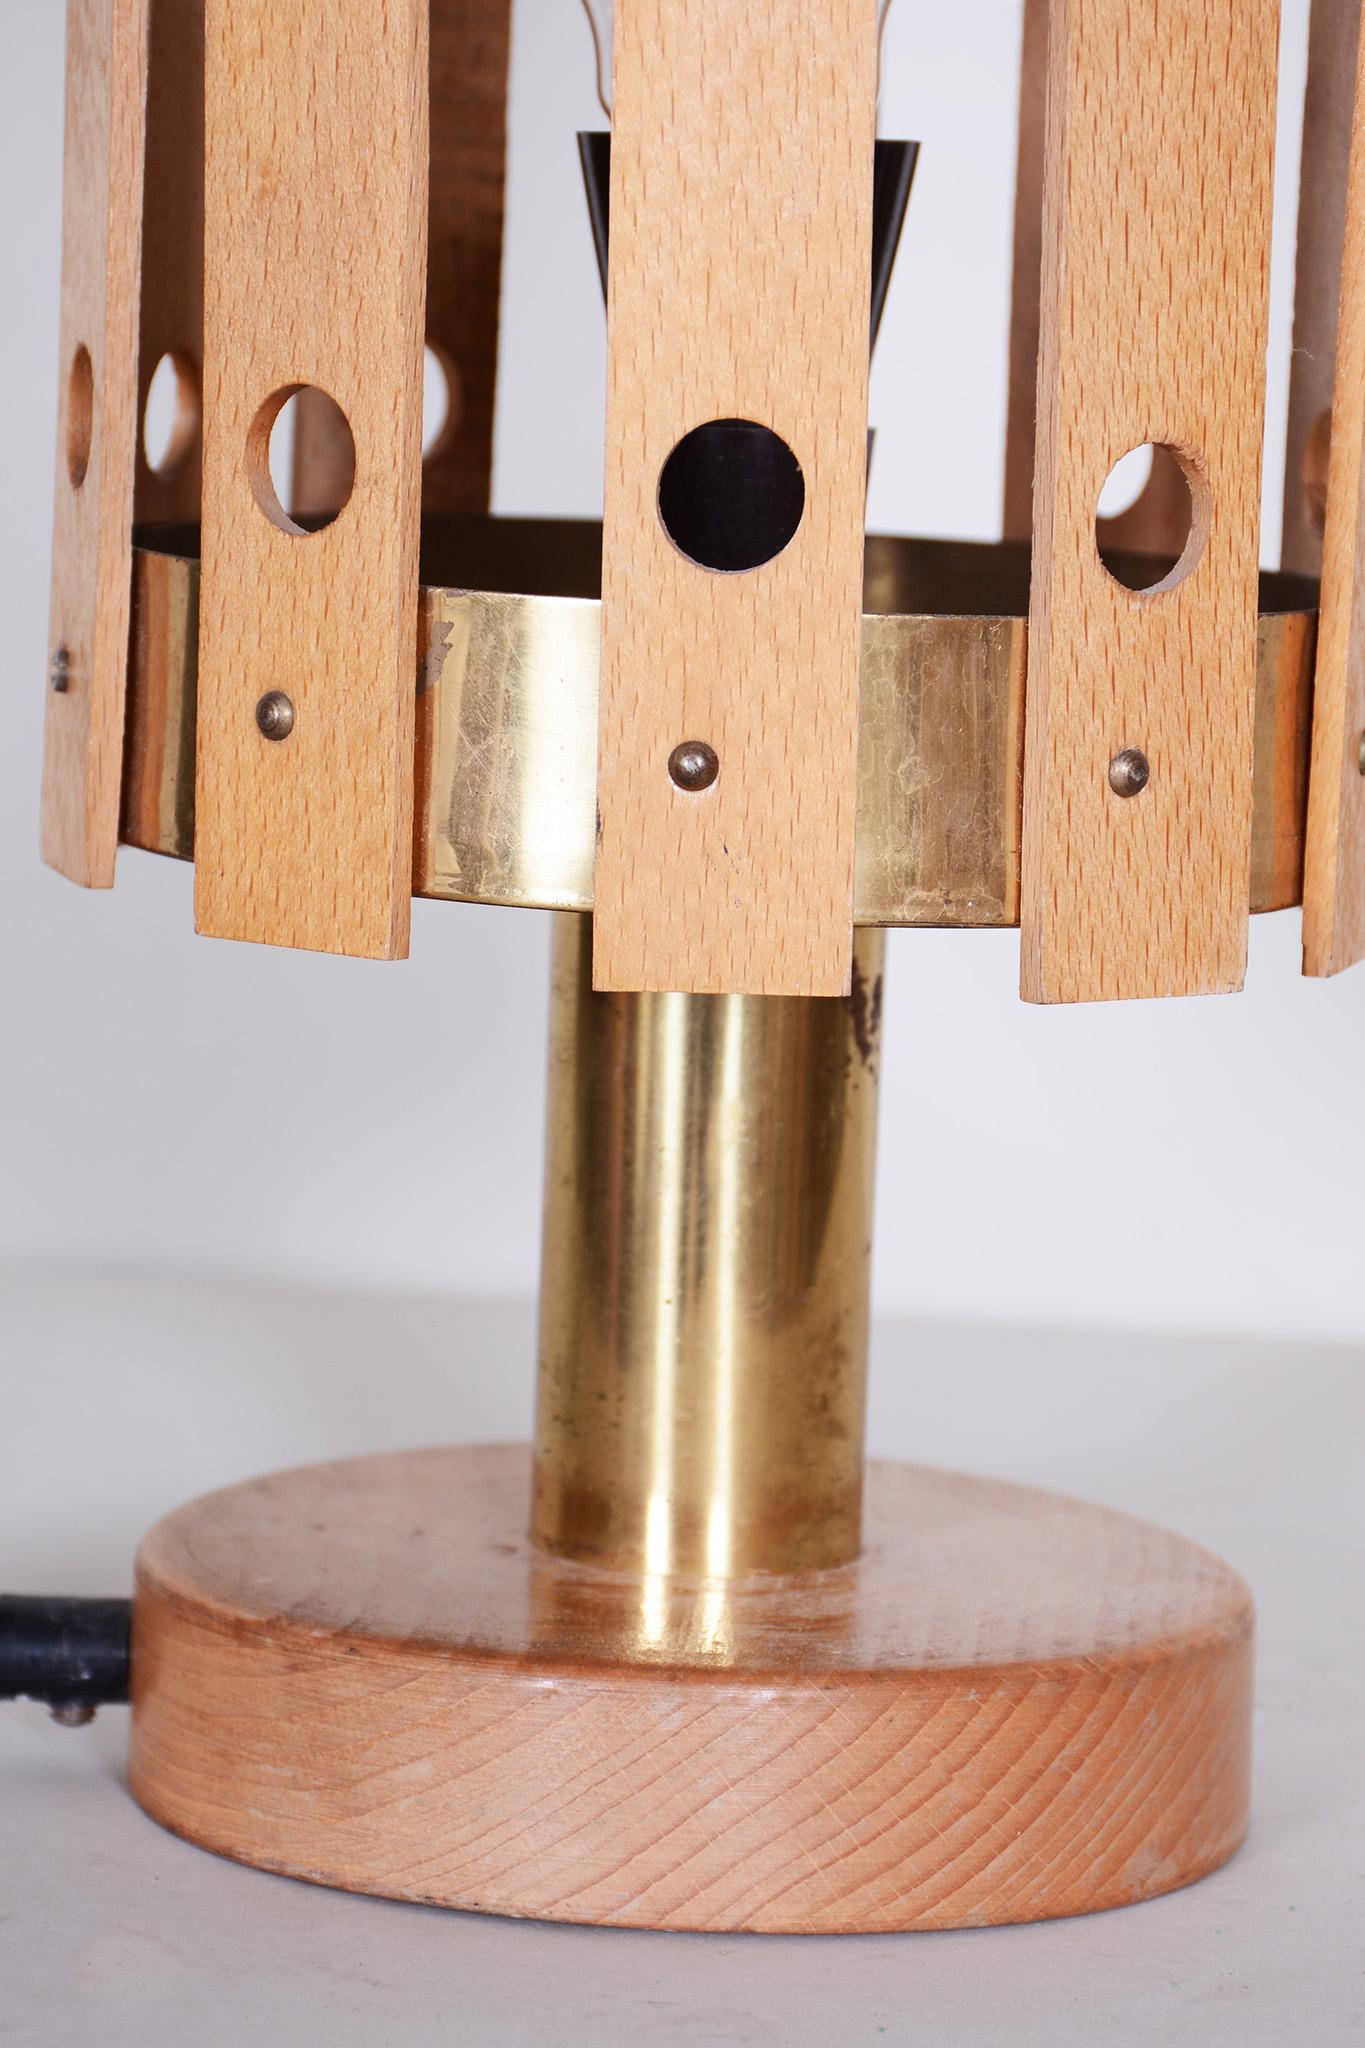 Midcentury Table Lamp, Beech, Brass, Made by Pokrok Zilina, Slovakia, 1960s For Sale 1